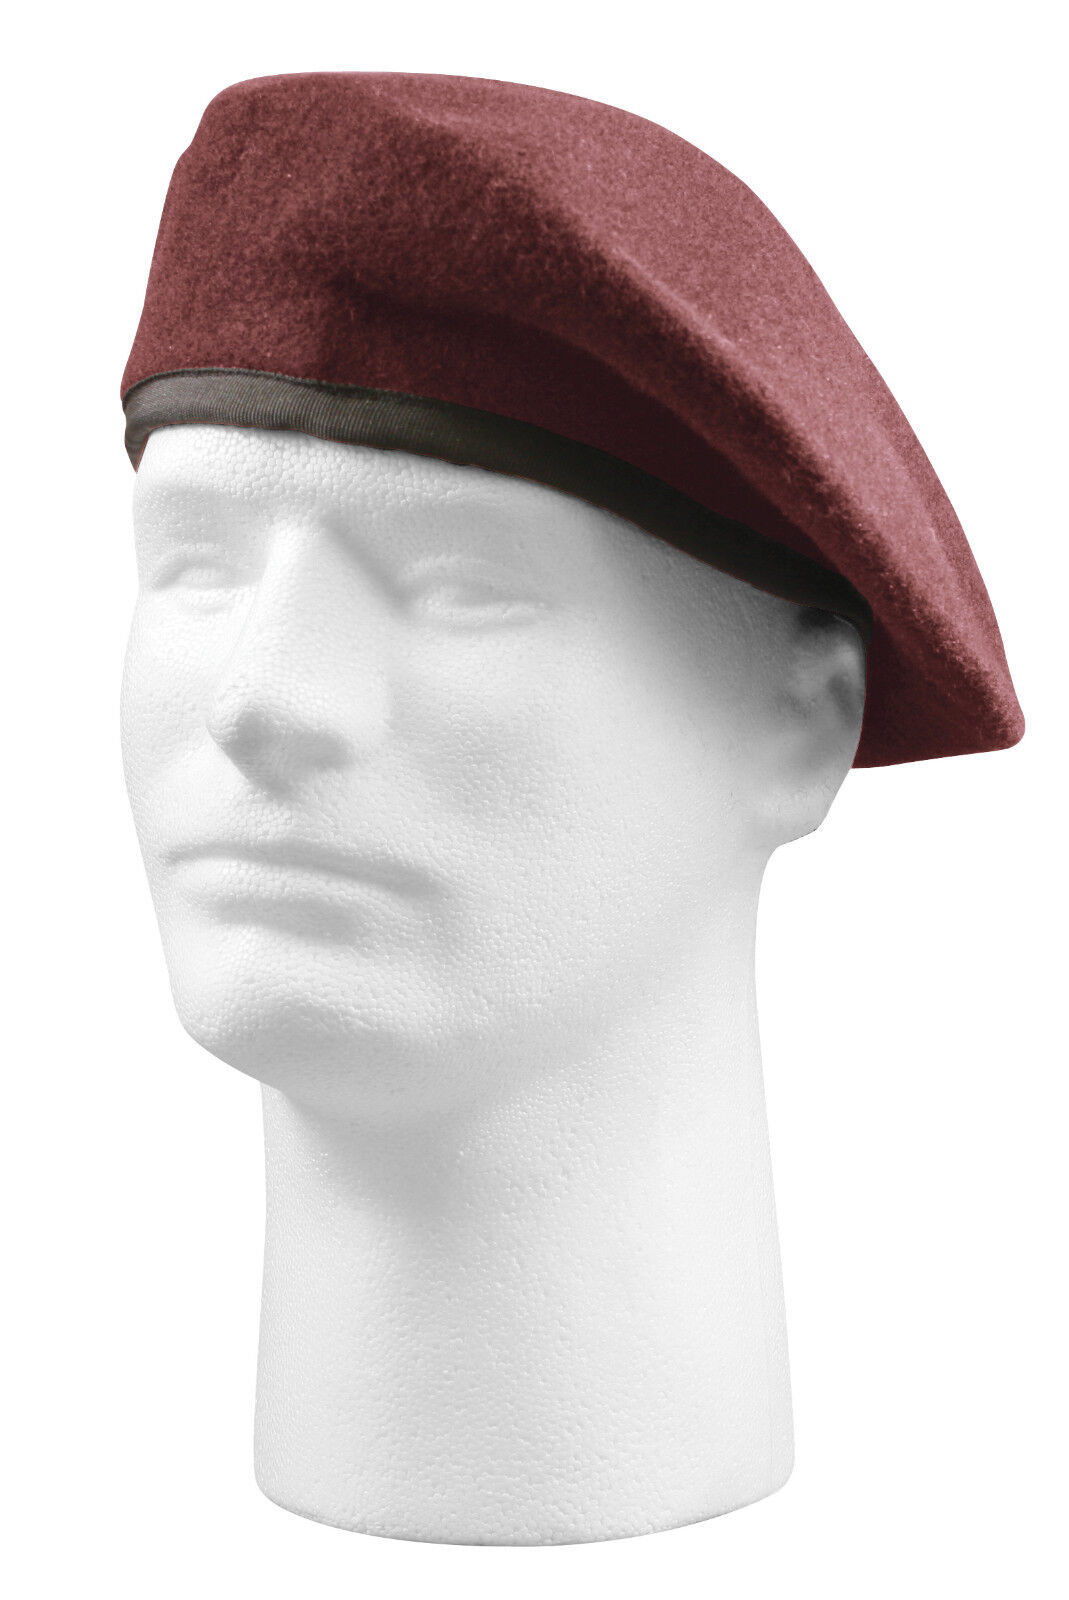 Pre shaved army berets